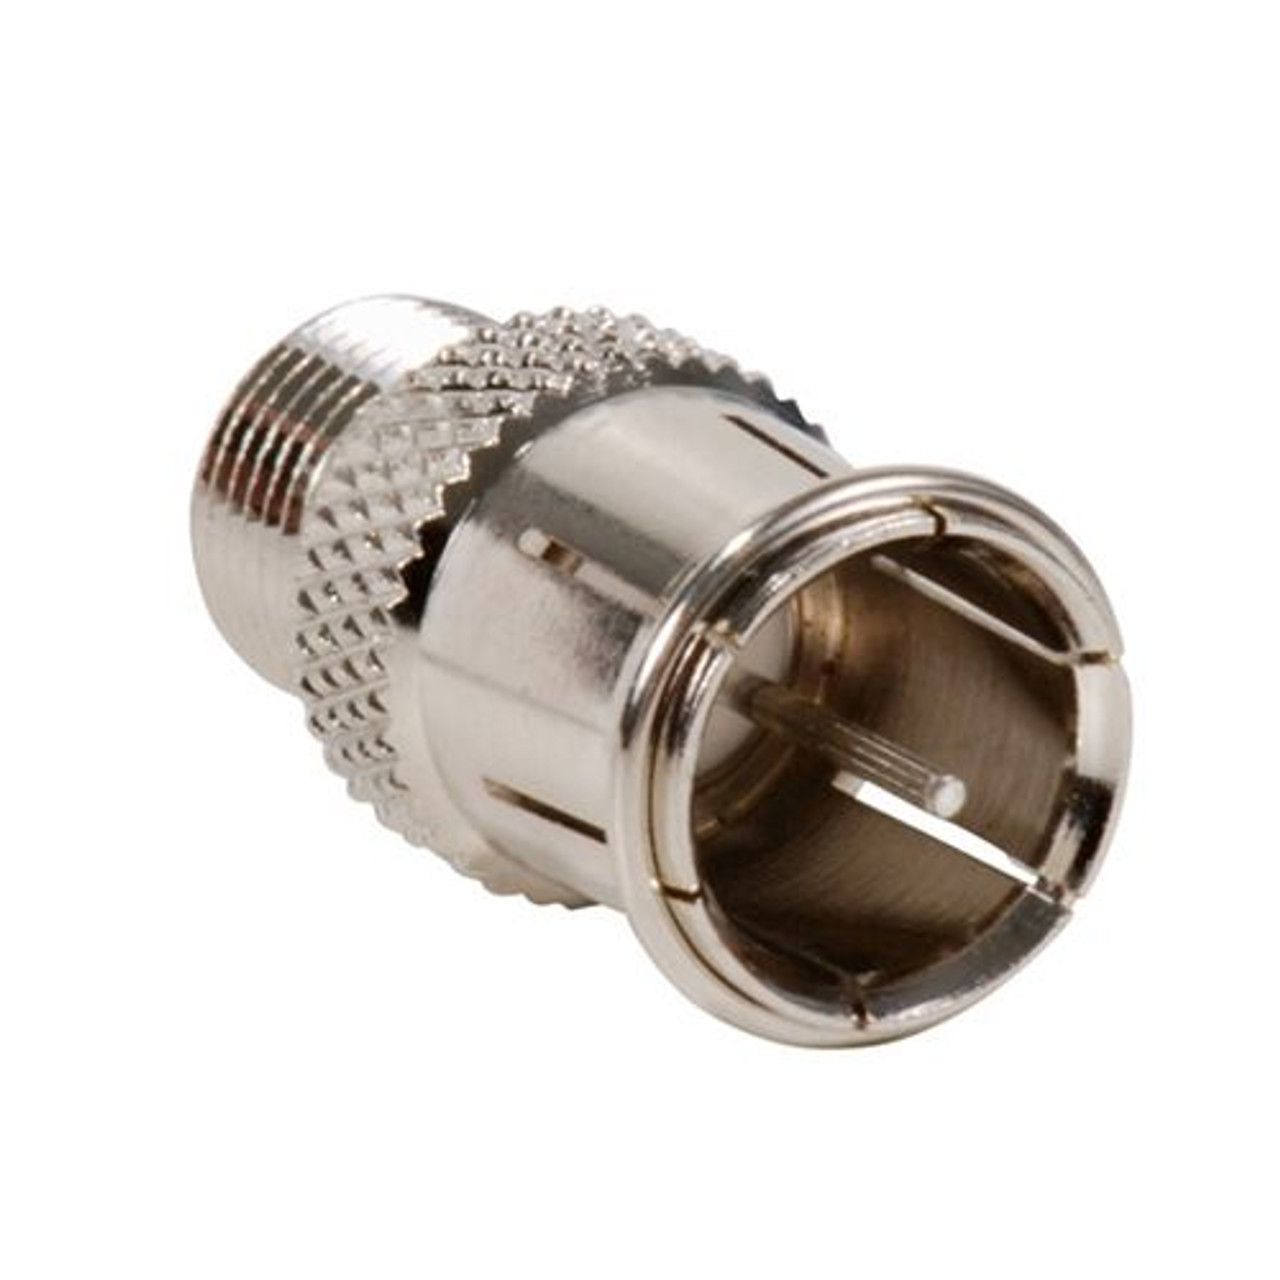 Eagle Push On F Connector Adapter 25 Pack F-Male to F Quick Disconnect Nickel Plated Push-On Plug Female to Male Coaxial Cable Plug Signal TV Video Component Connection